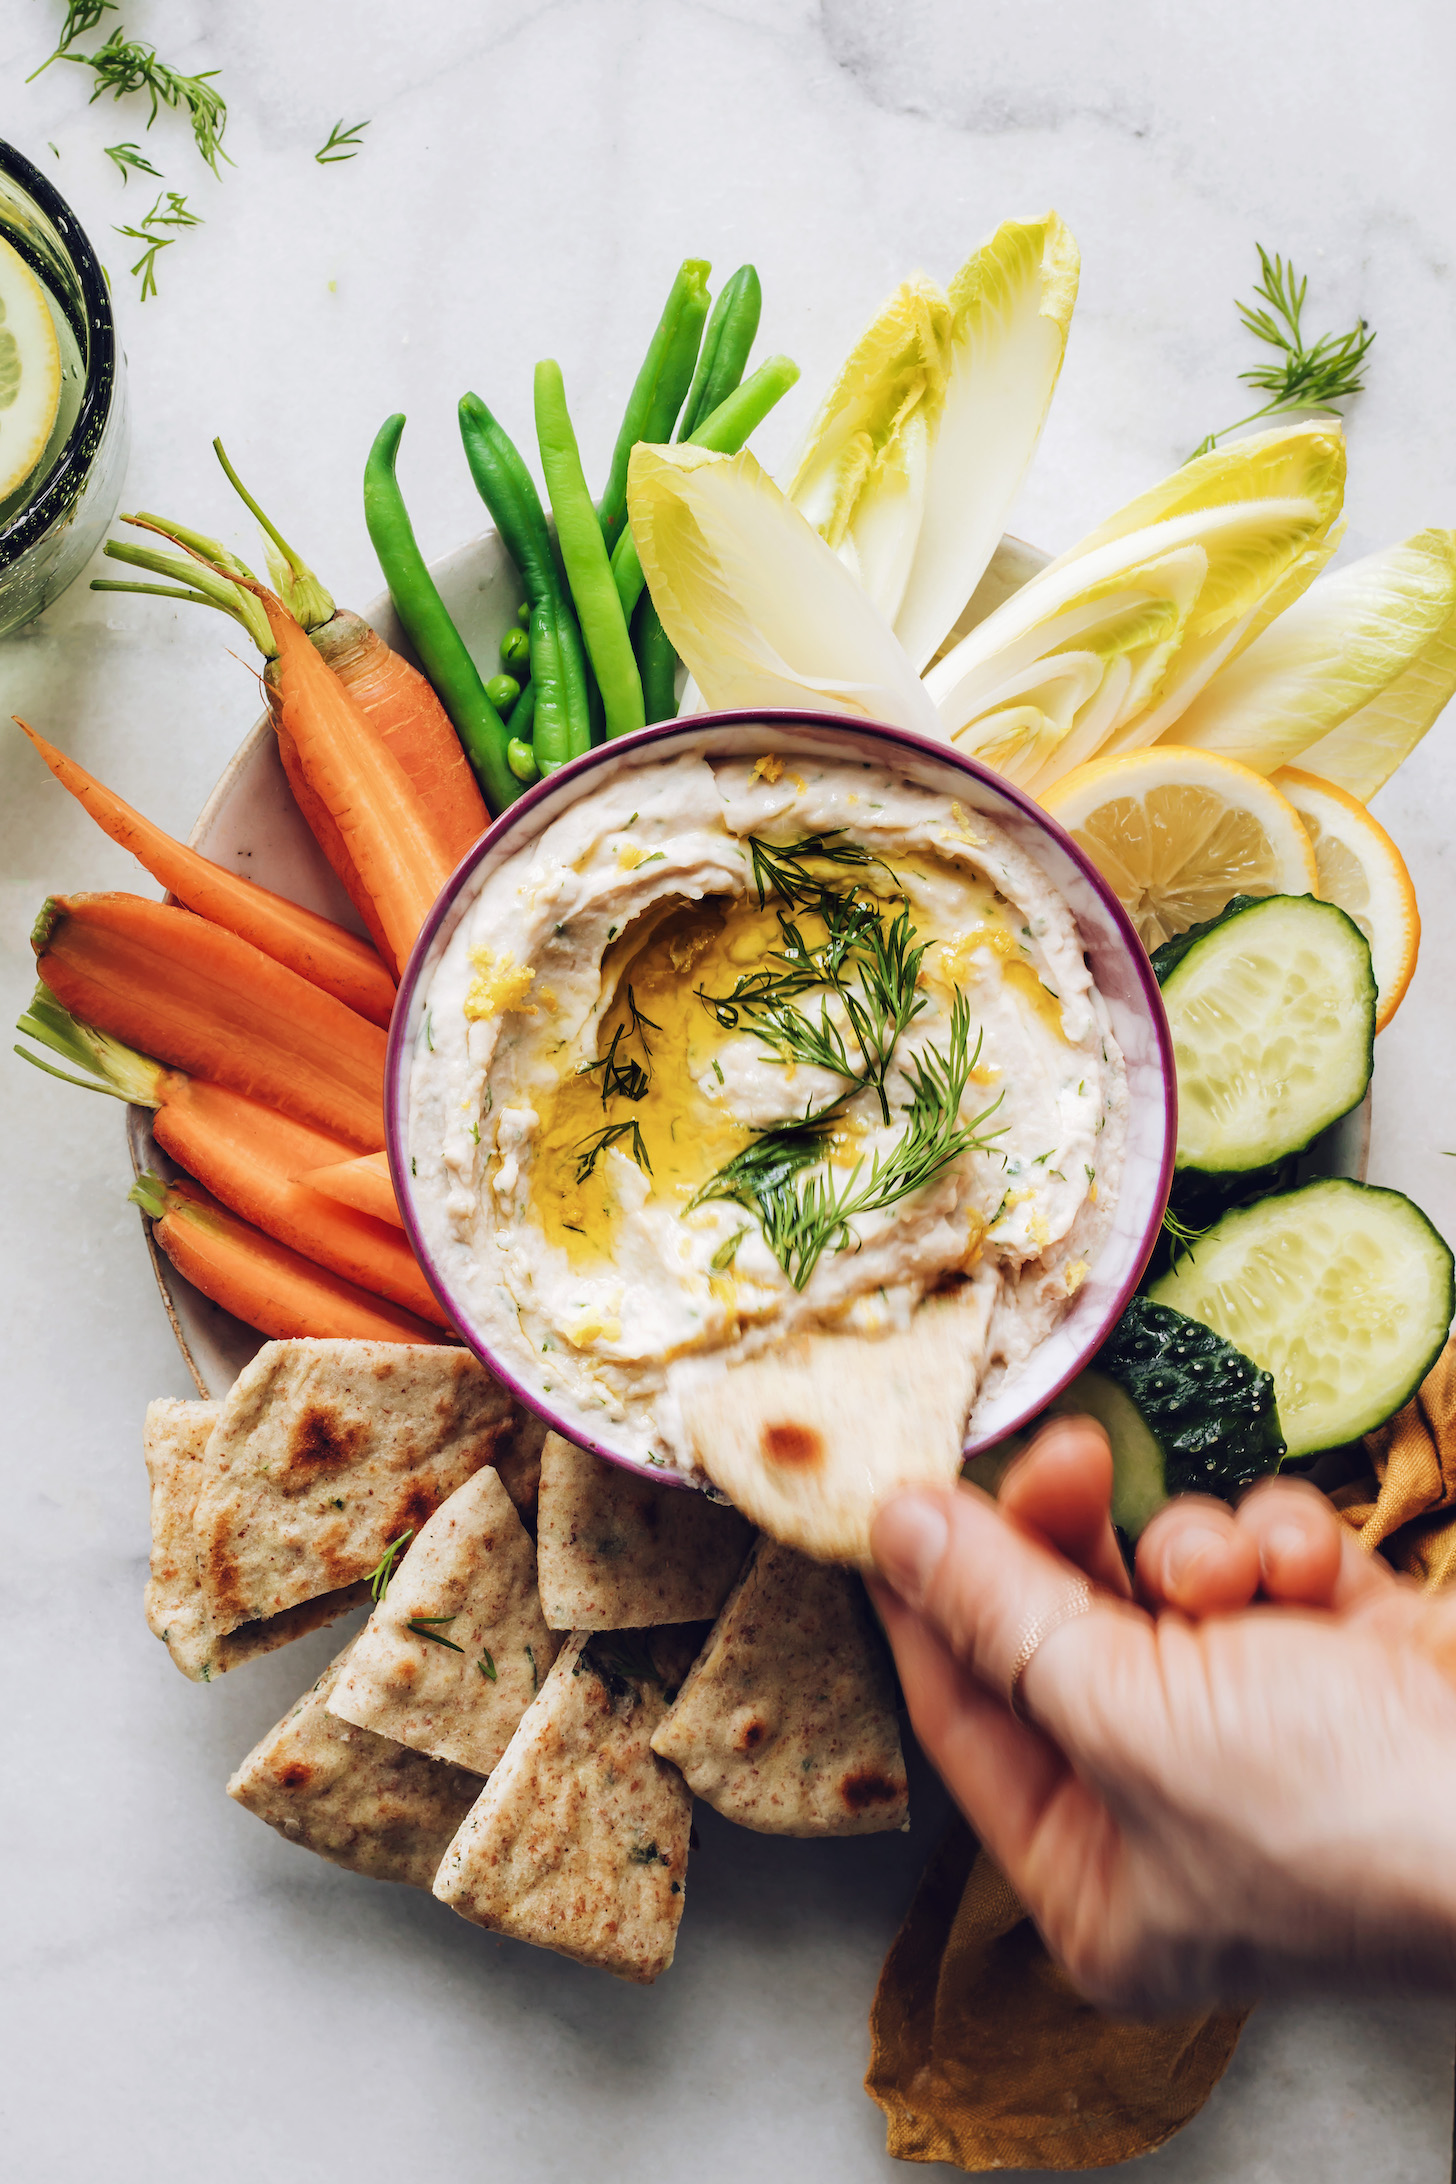 Dipping a slice of pita bread into our lemon and herb white bean hummus recipe